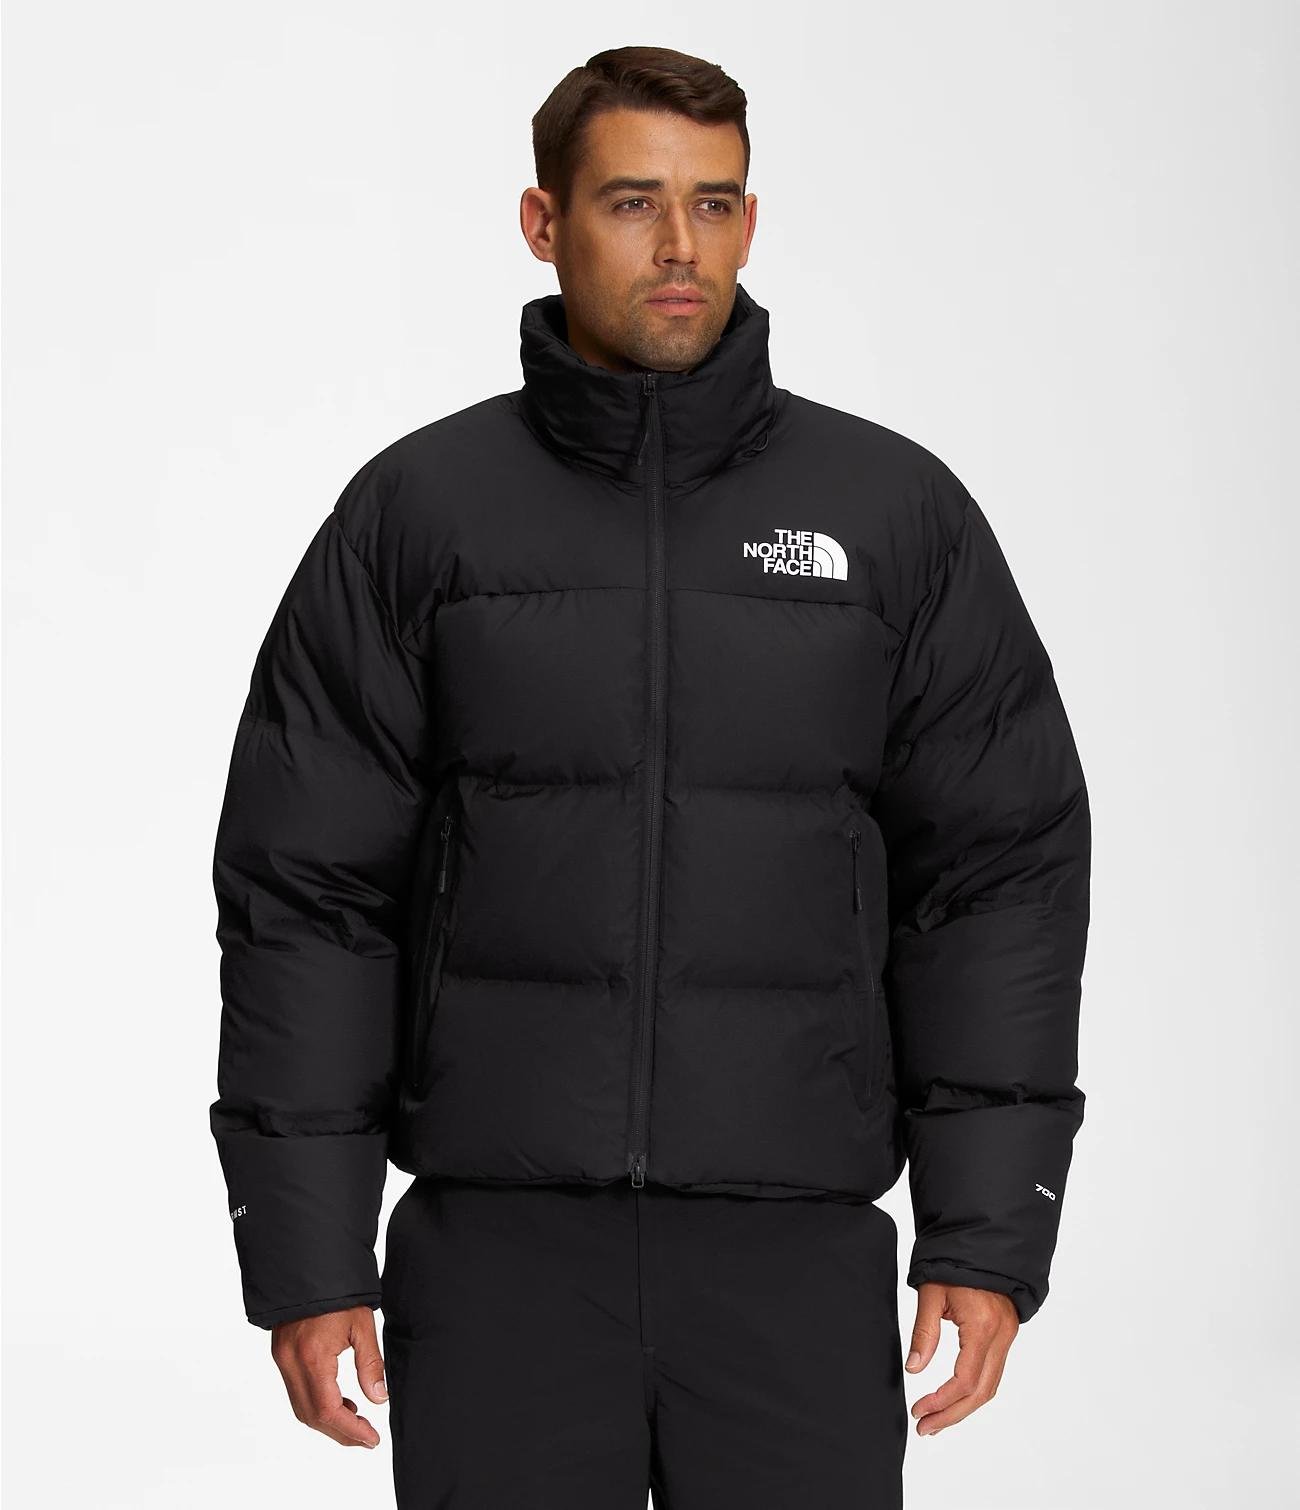 Men’s RMST Nuptse Jacket by THE NORTH FACE